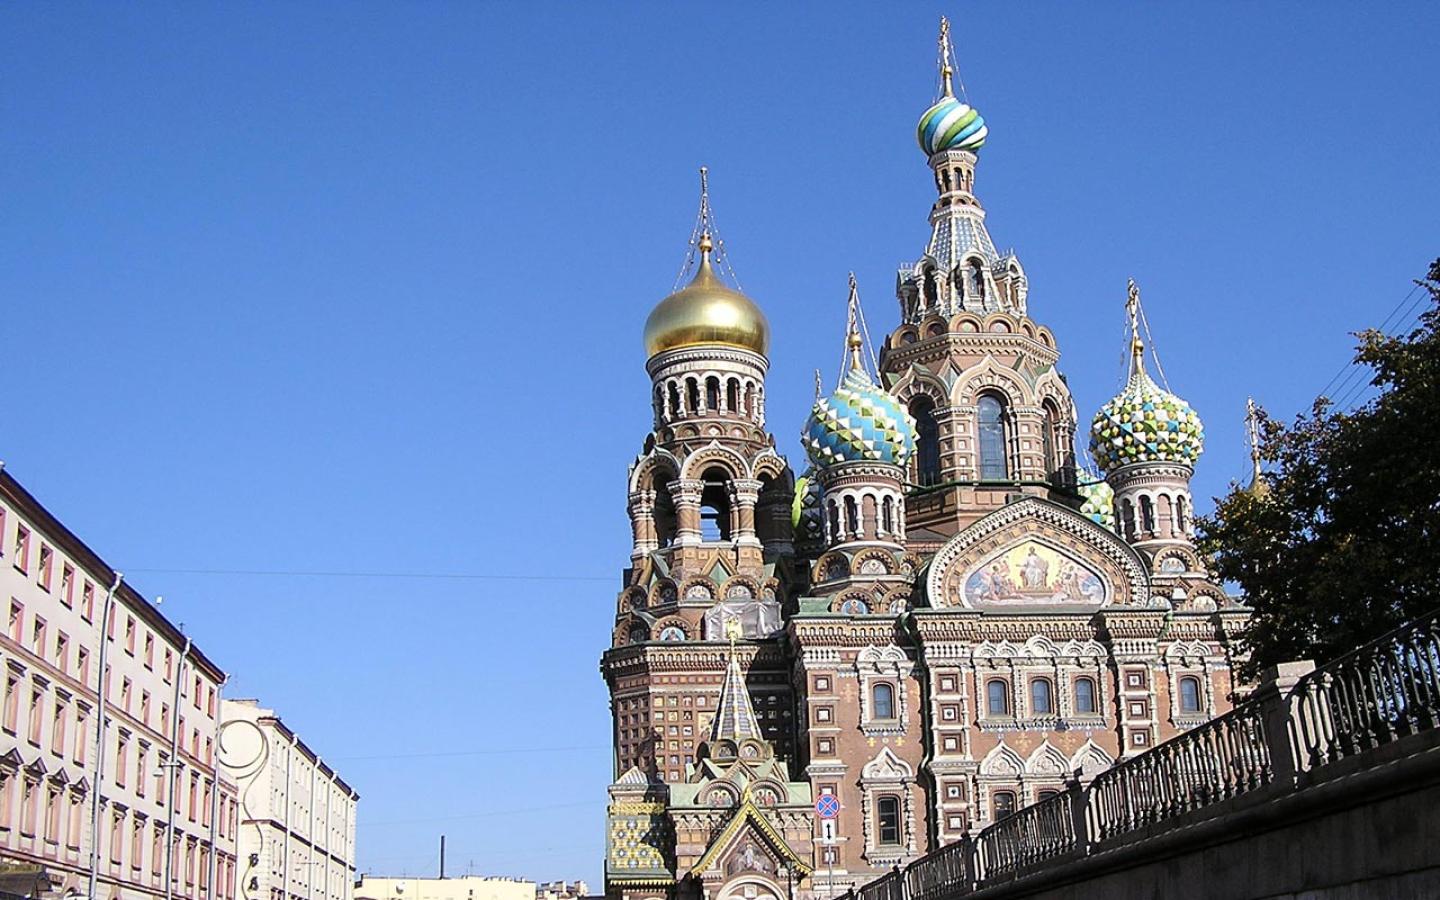 St Petersburg - Church of the Sviour on Spilled Blood Wallpaper #1 1440 x 900 